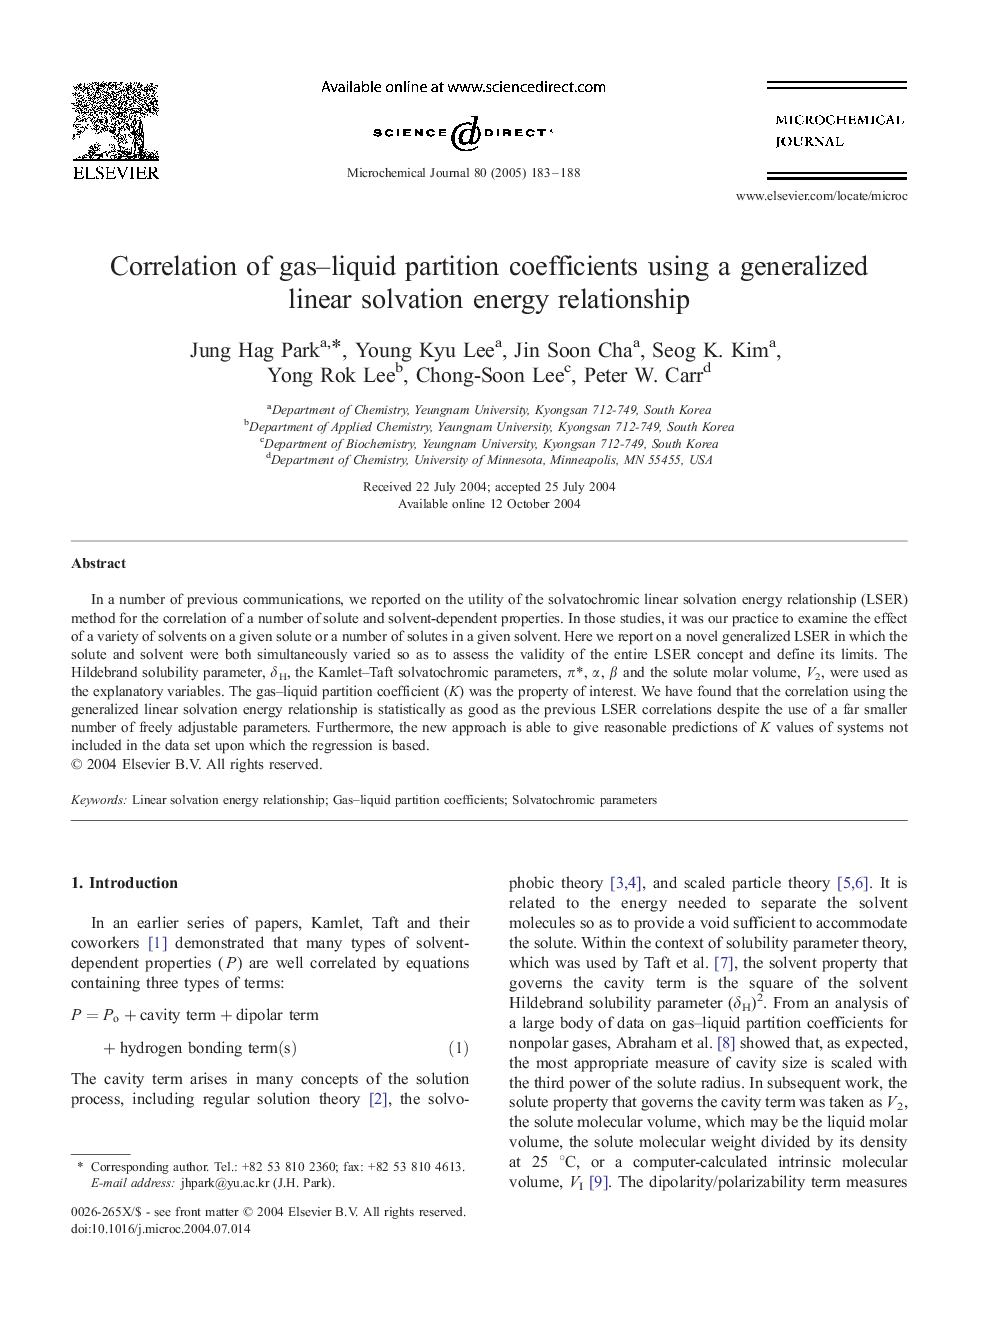 Correlation of gas-liquid partition coefficients using a generalized linear solvation energy relationship